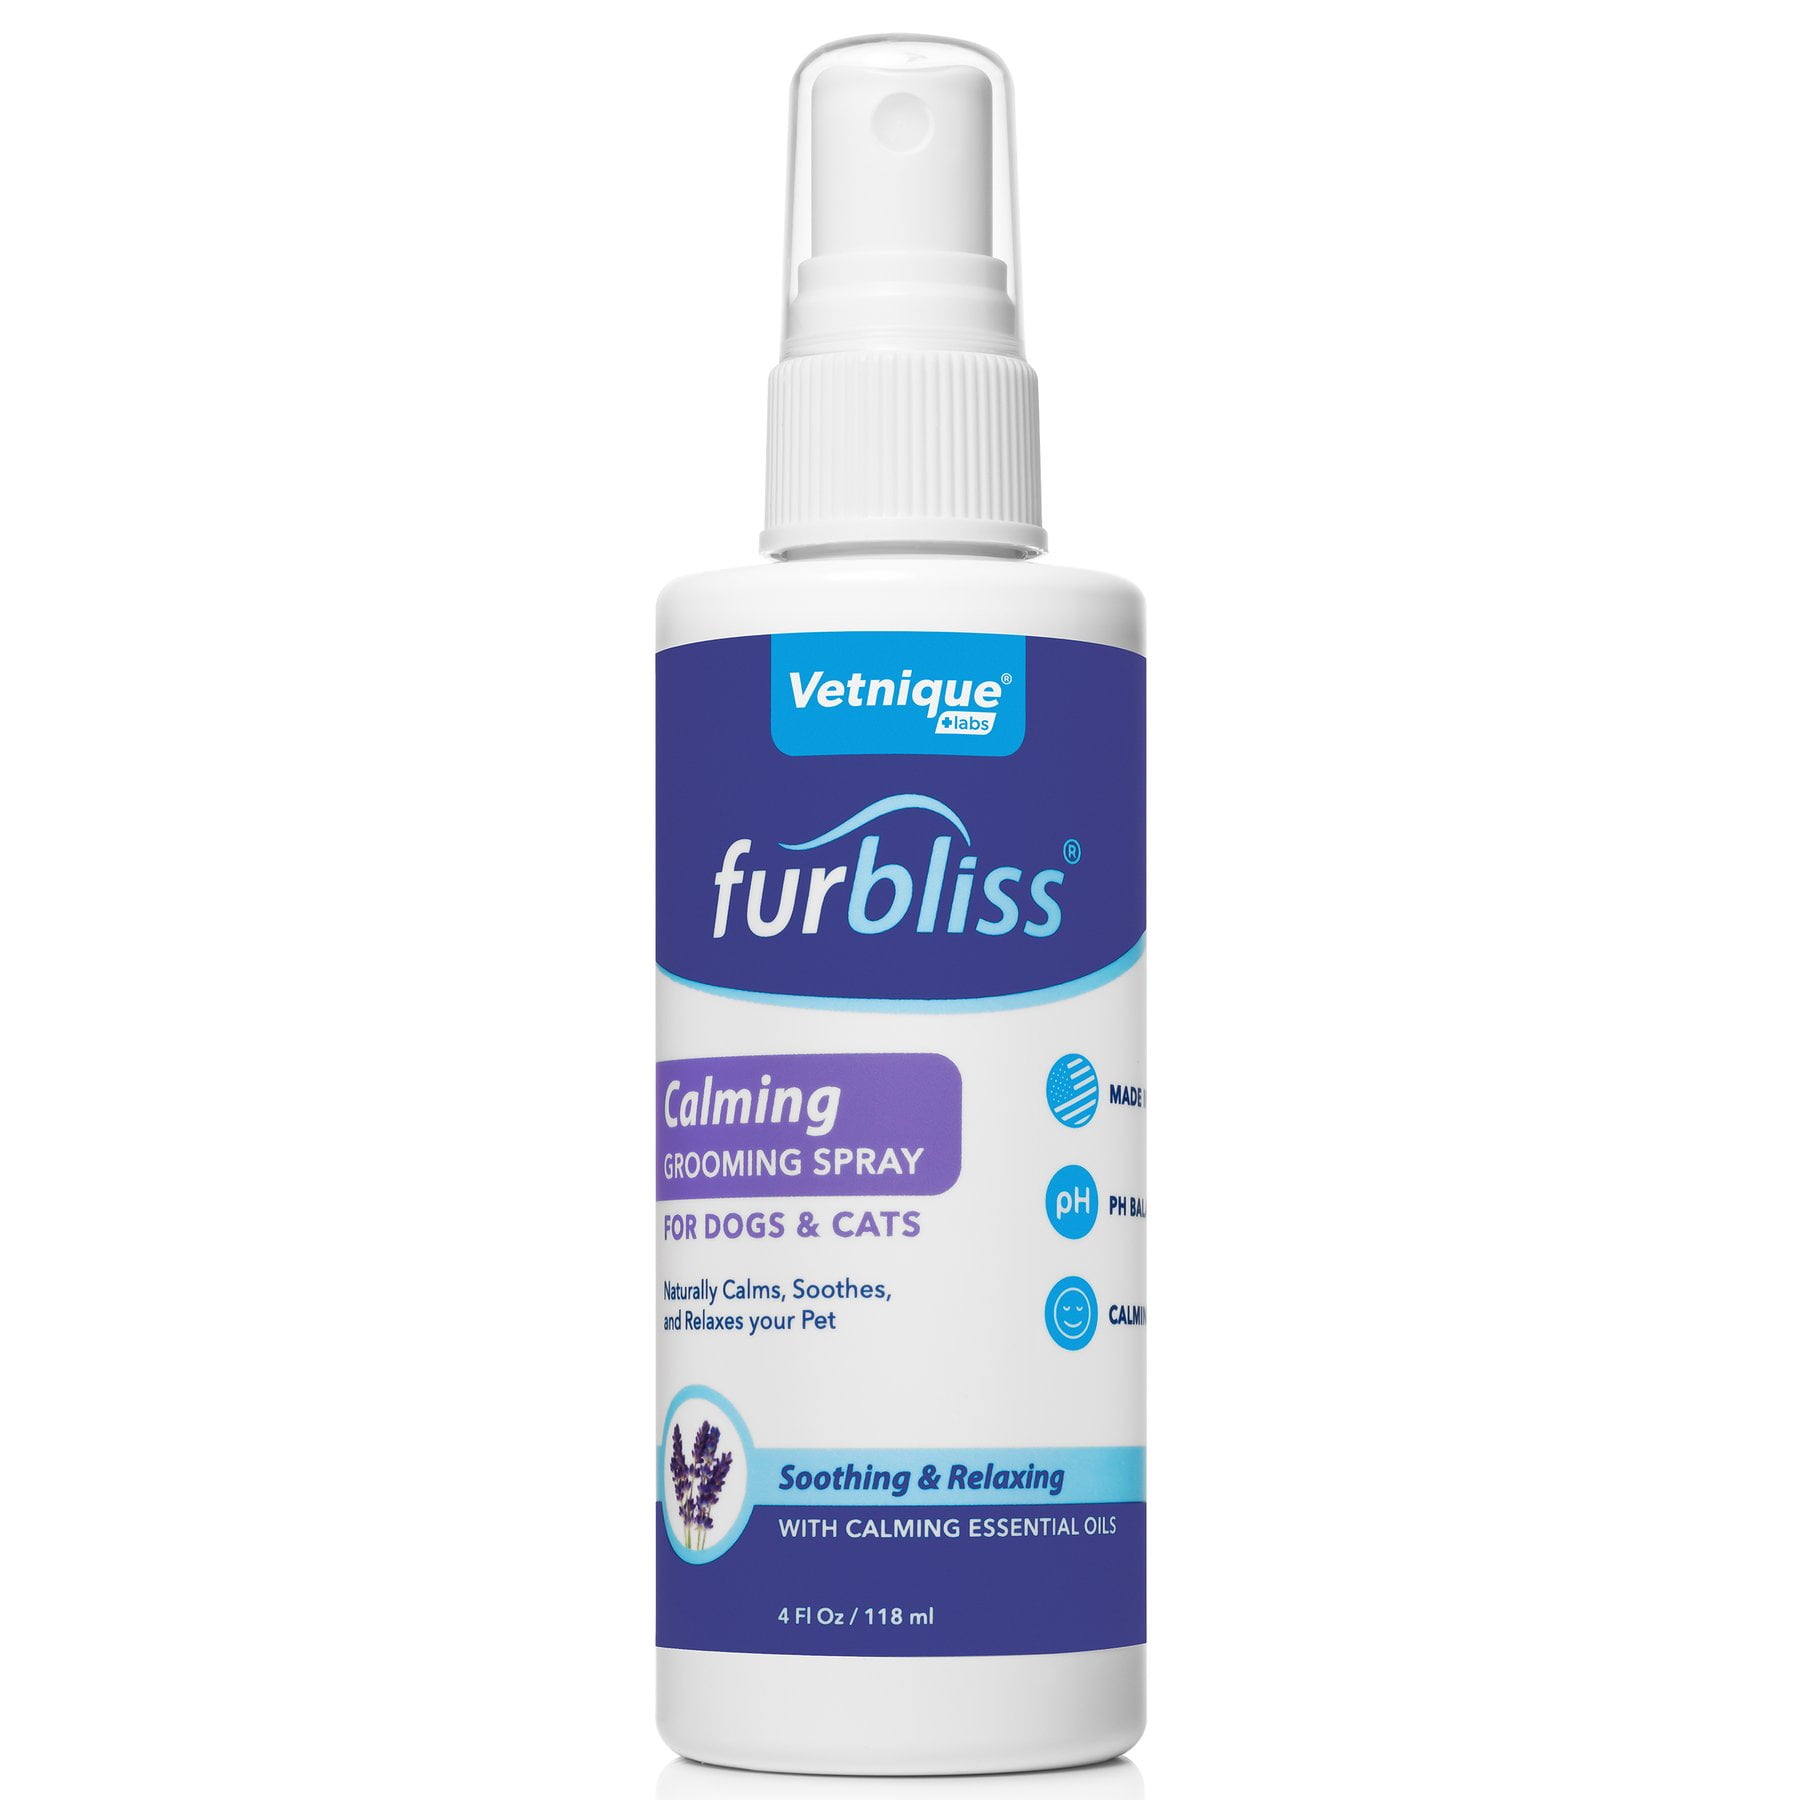 Furbliss Calming Dog Cologne and Cat Perfume Spray, with Calming